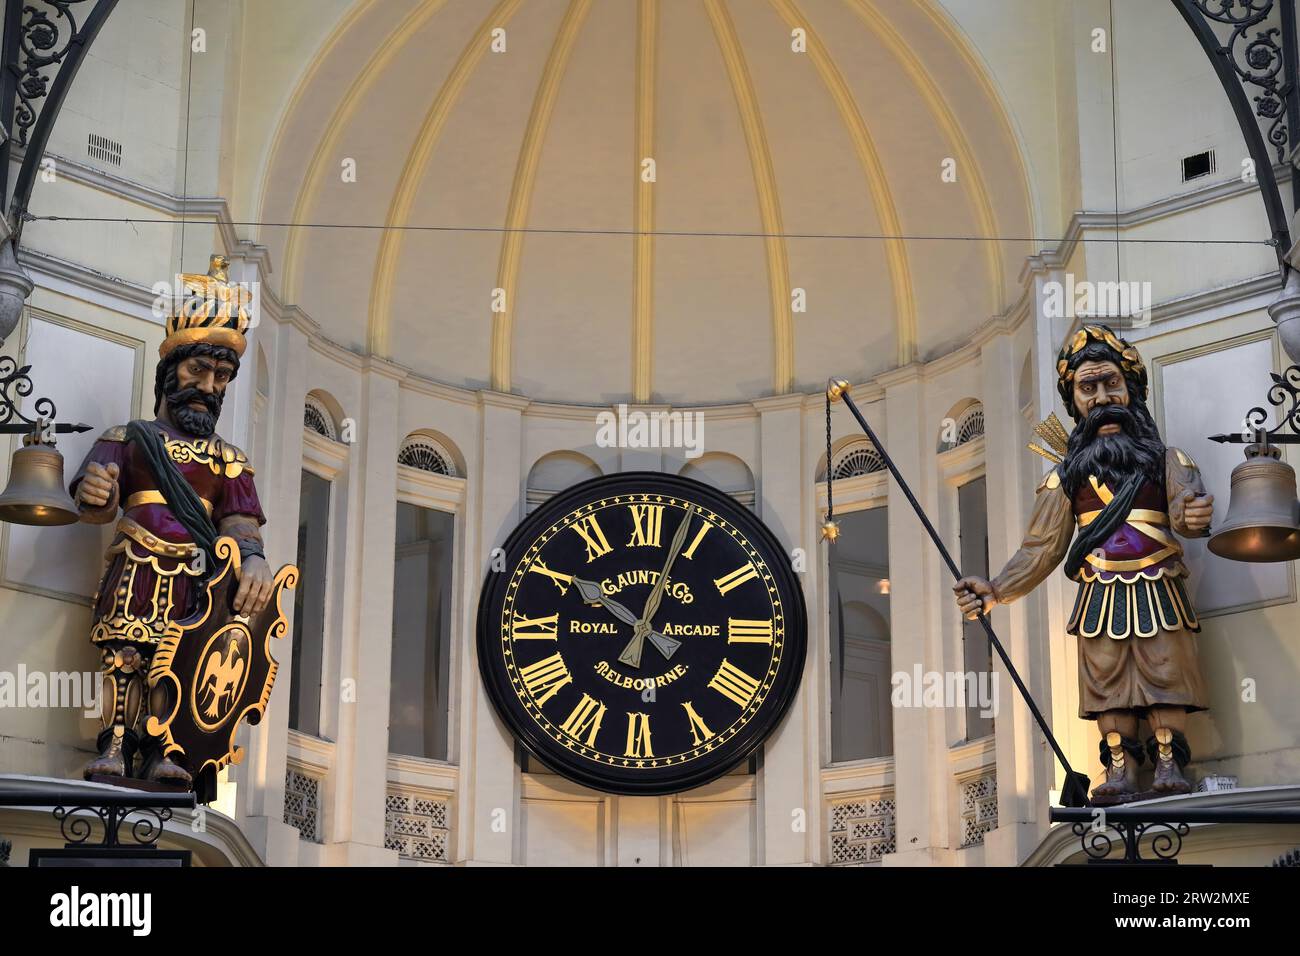 934 Gog and Magog automata and Gaunt's clock in The Royal Arcade, Australia's oldest extant shopping arcade. Melbourne. Stock Photo